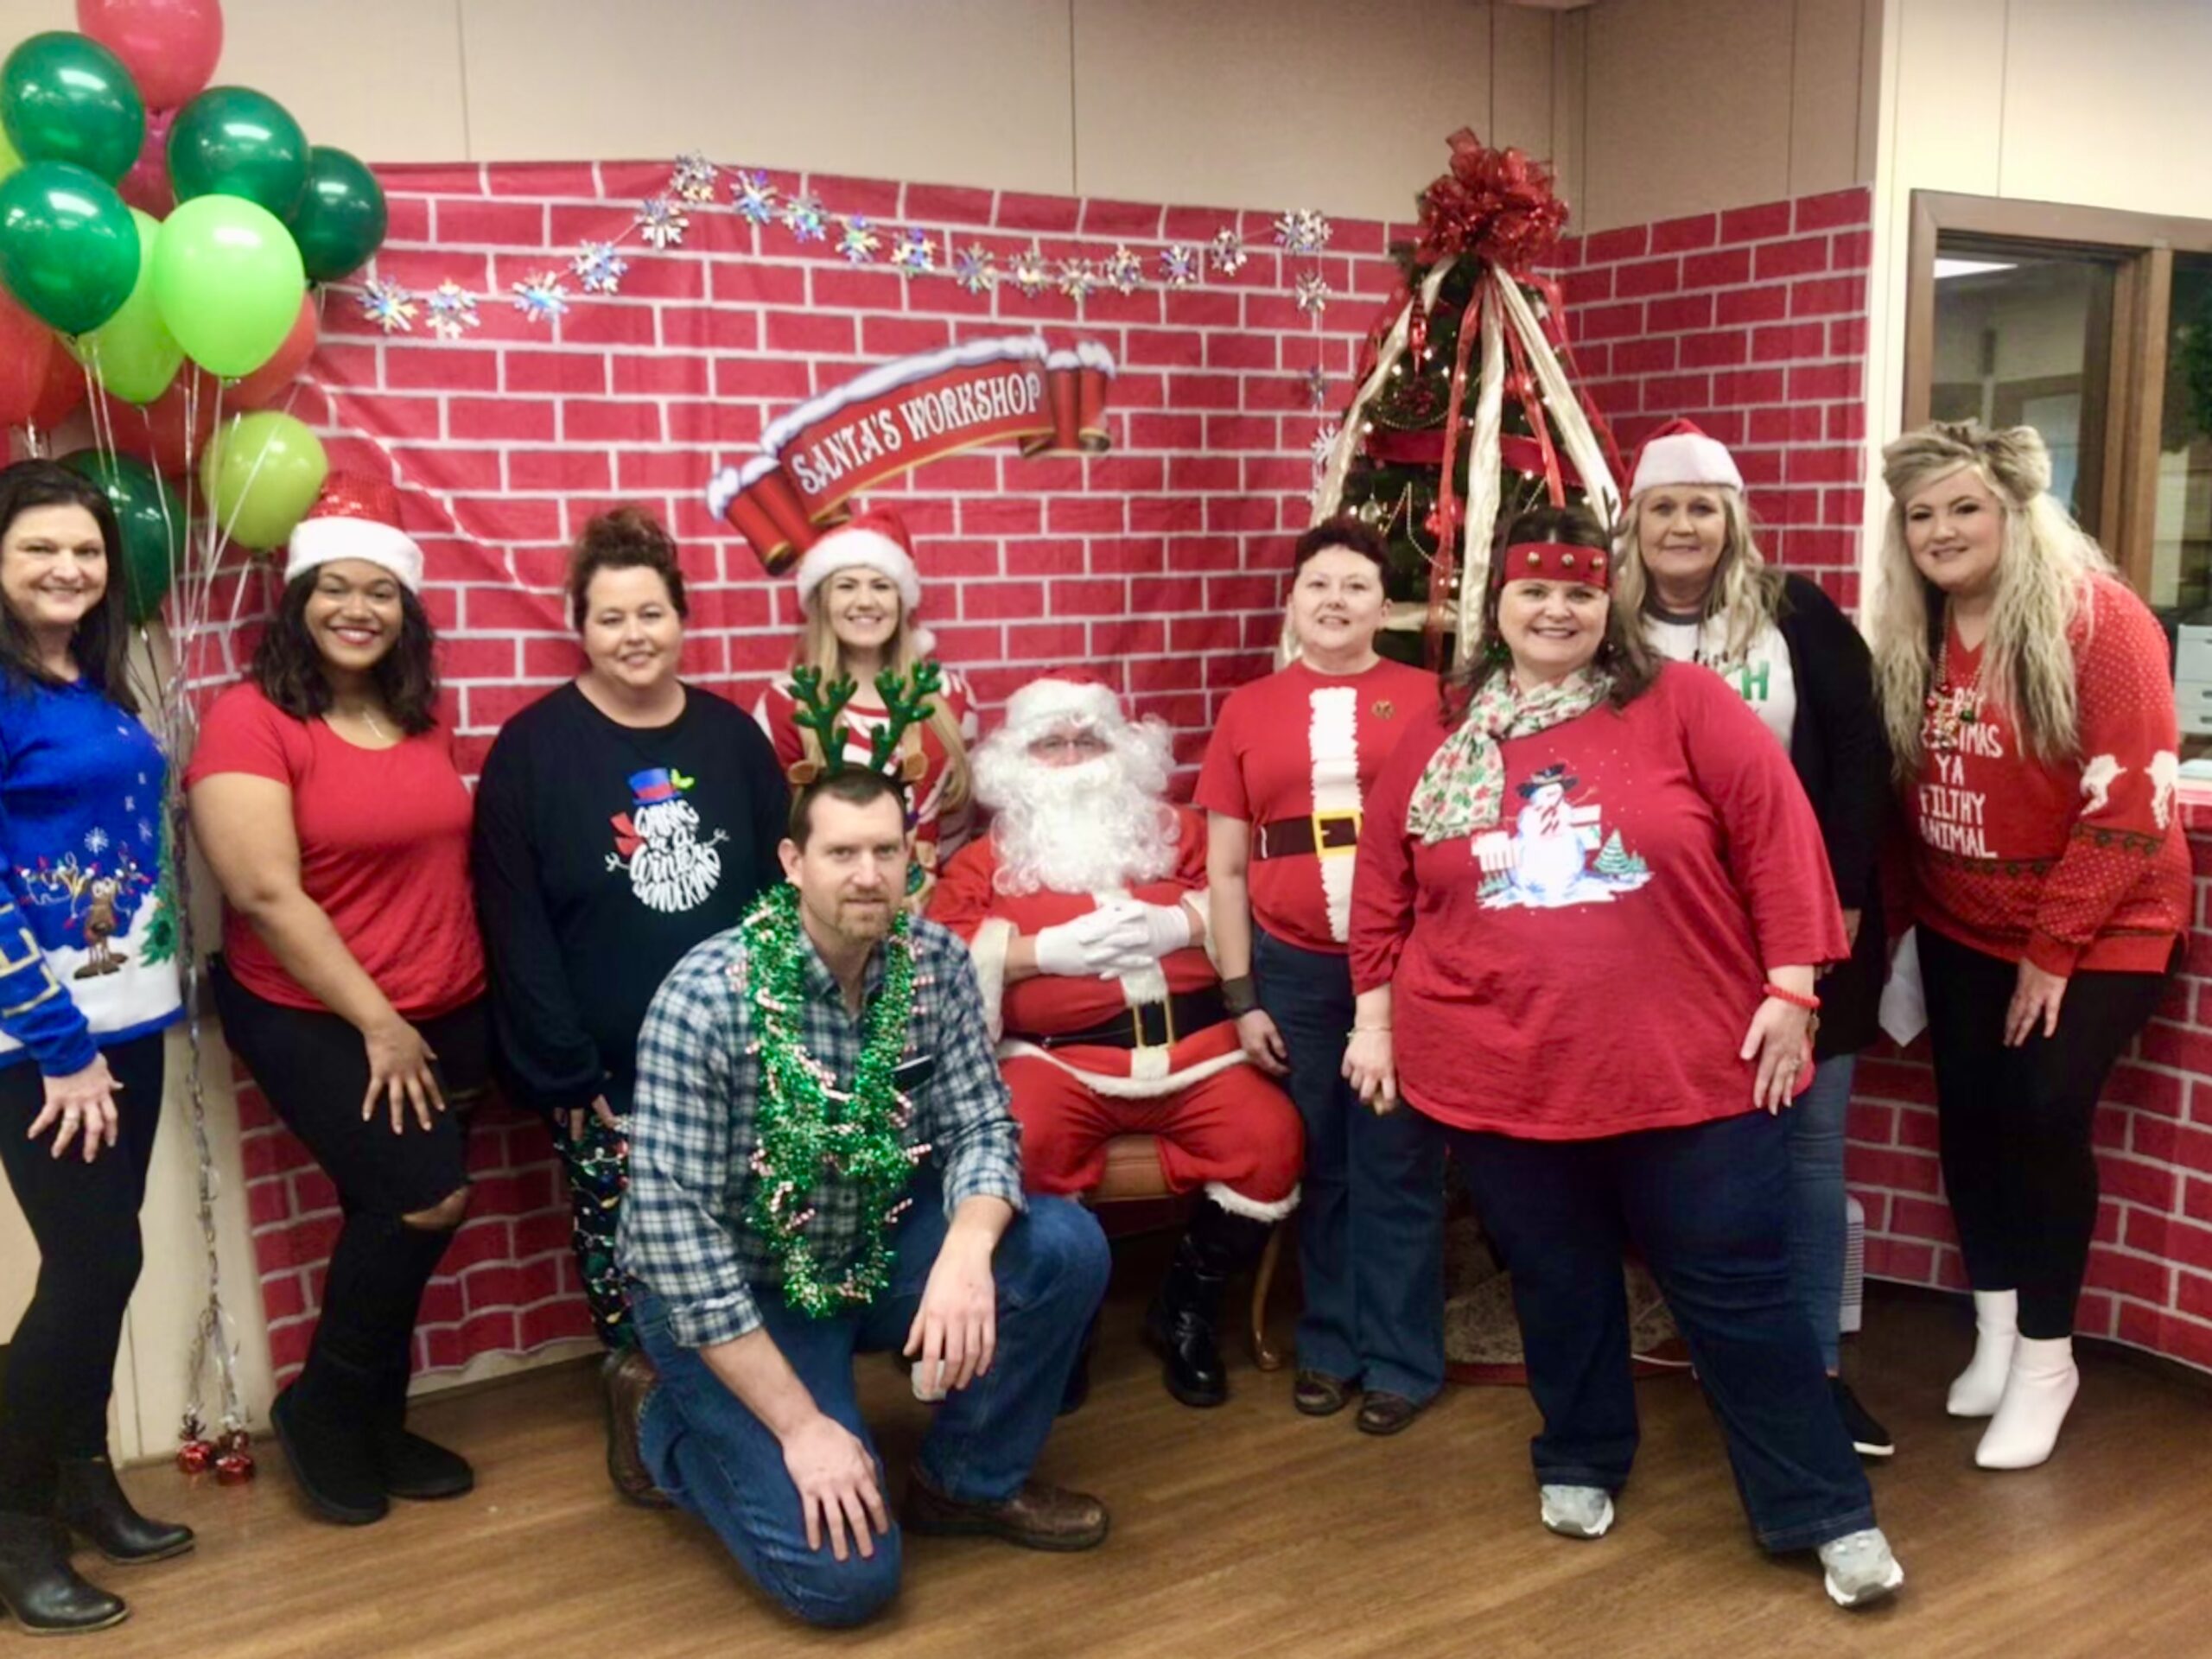 Credit Union Spreads Christmas Cheer to Community